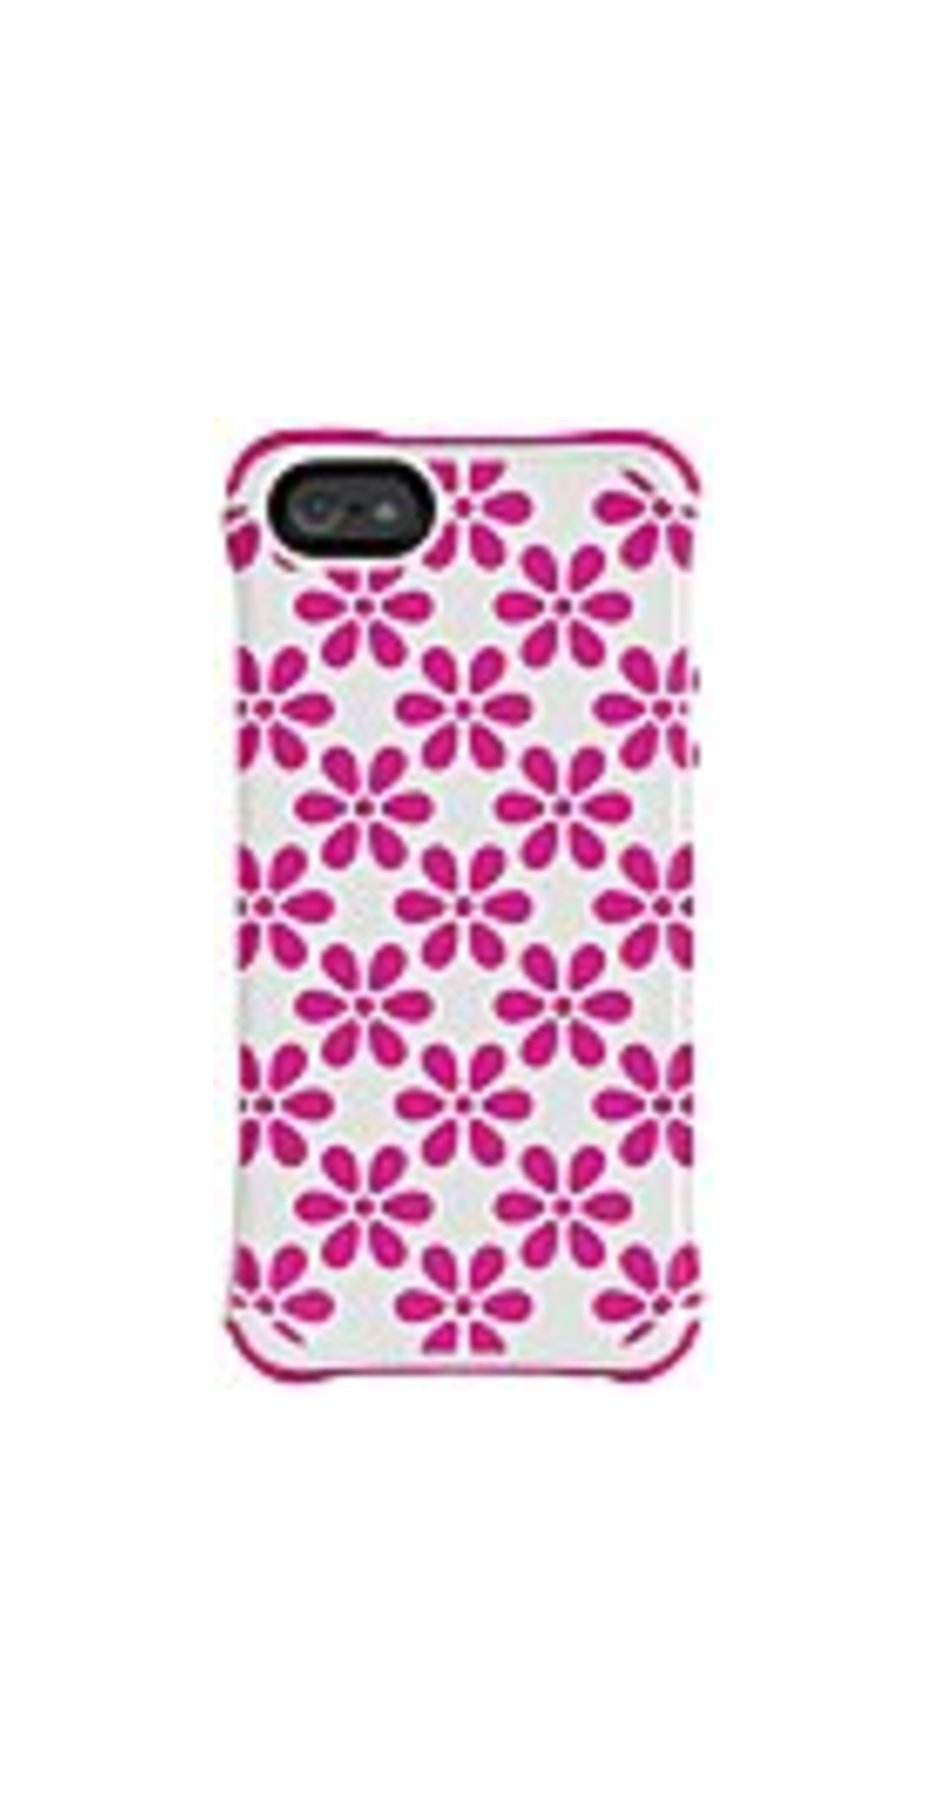 Ballistic iPhone 5 Aspira Series Case - For Apple iPhone Smartphone - Pink and White Flower - Rubberized - Shock Absorbing - Plastic, Thermoplastic Po -  AP1086-A055